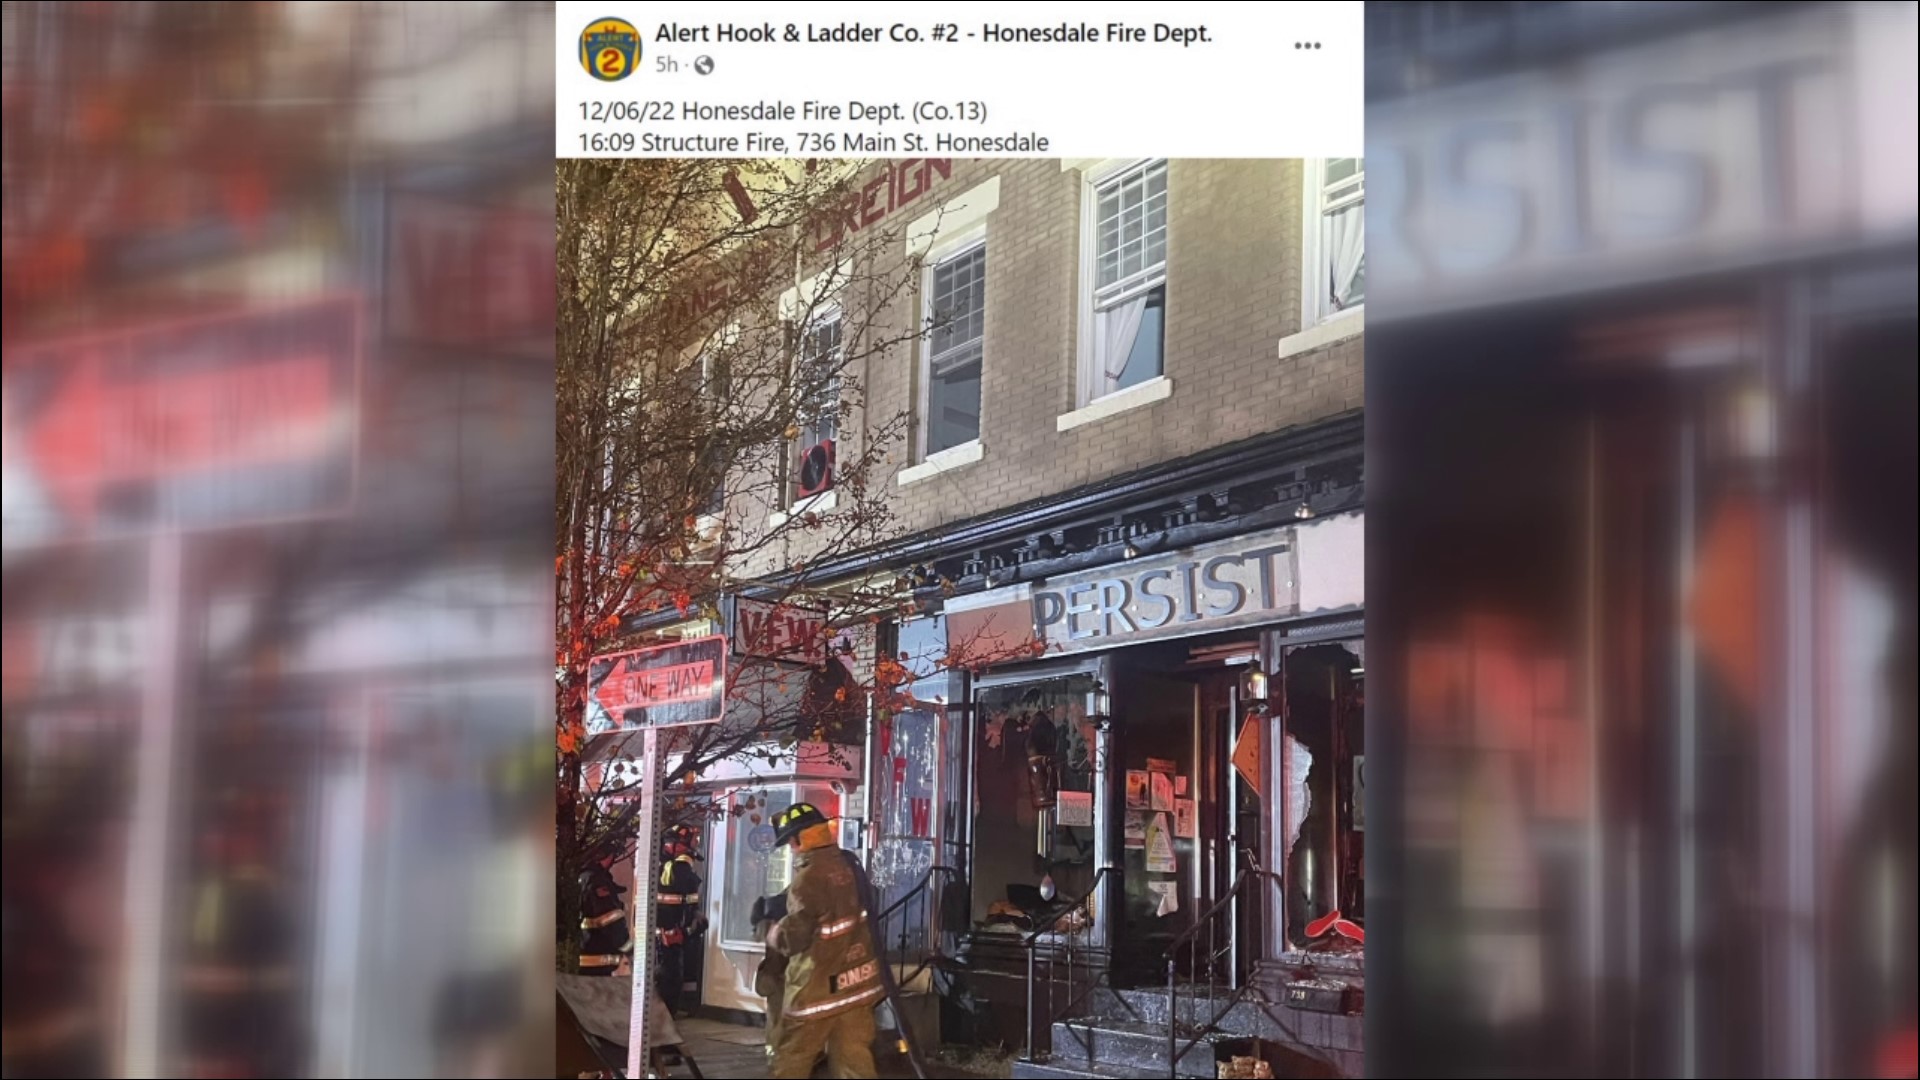 Flames damaged a business on Main Street in Honesdale on Tuesday.